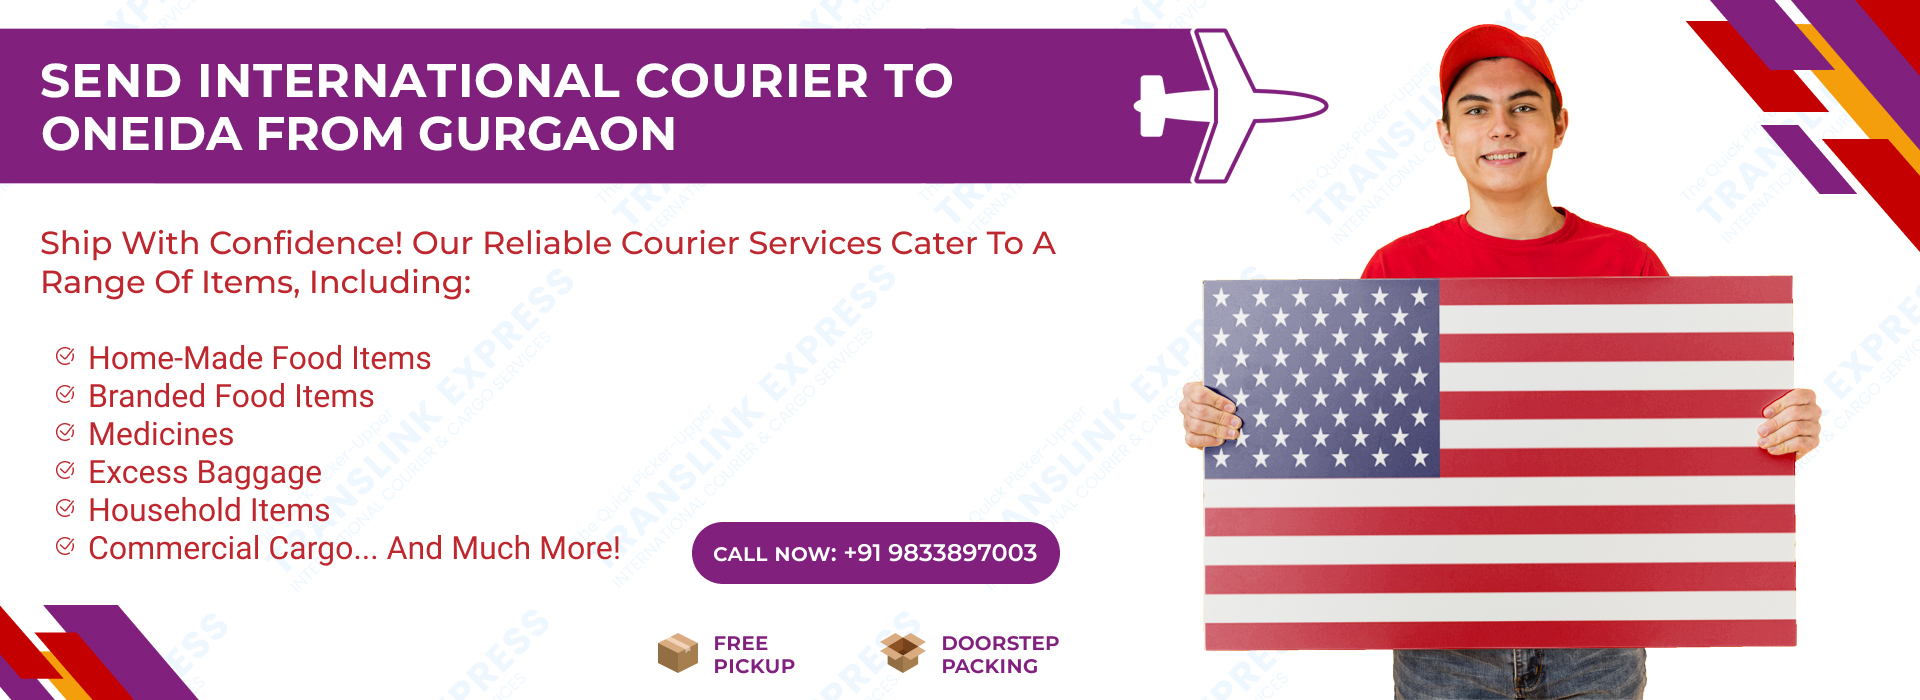 Courier to Oneida From Gurgaon